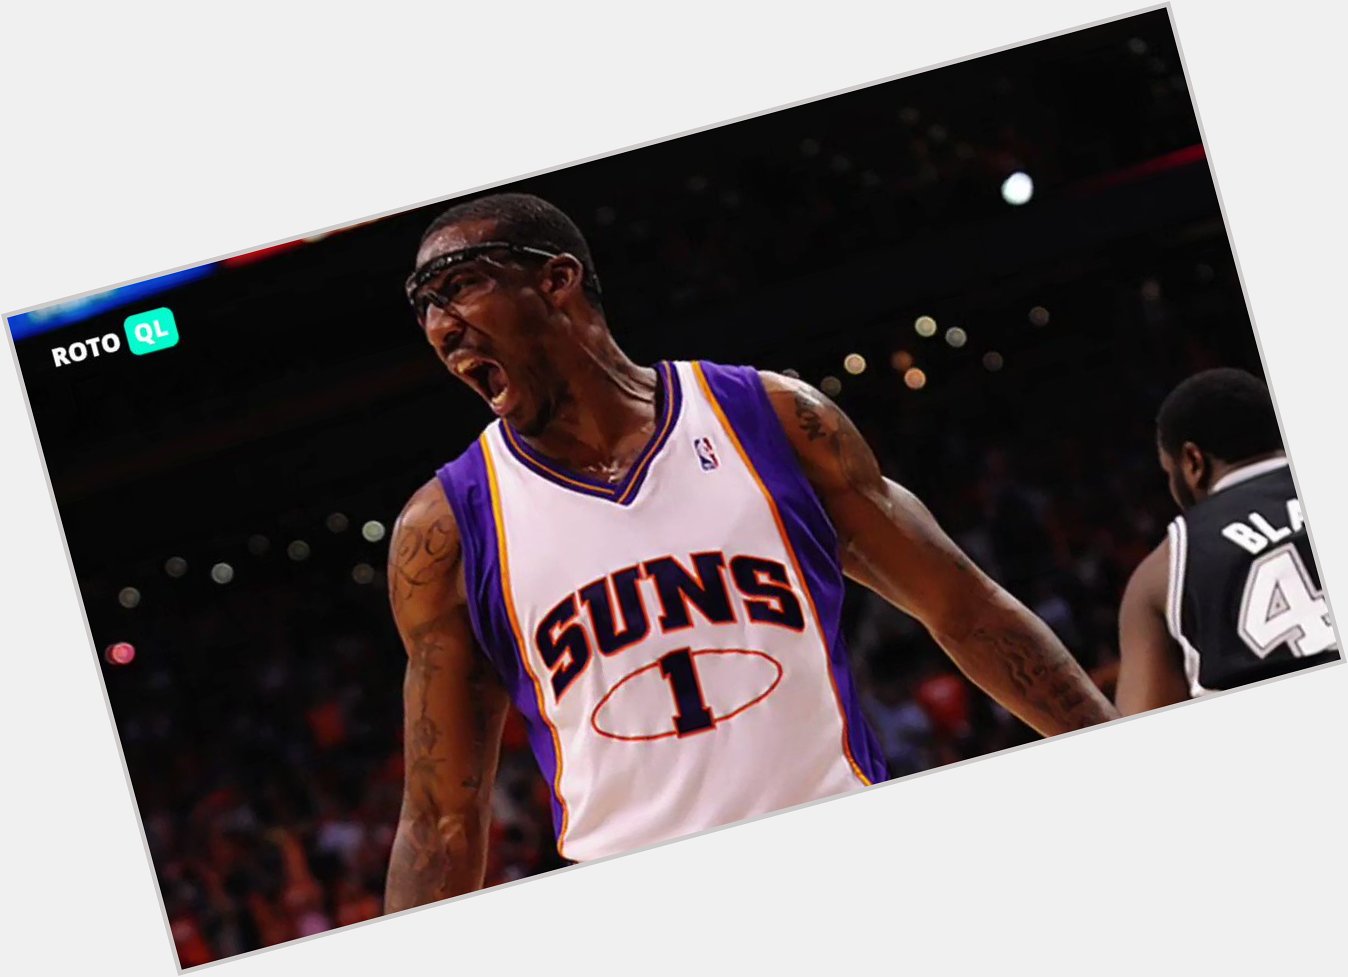 STAT was one of the most ferocious dunkers in NBA history Happy 36th birthday to Amar\e Stoudemire 